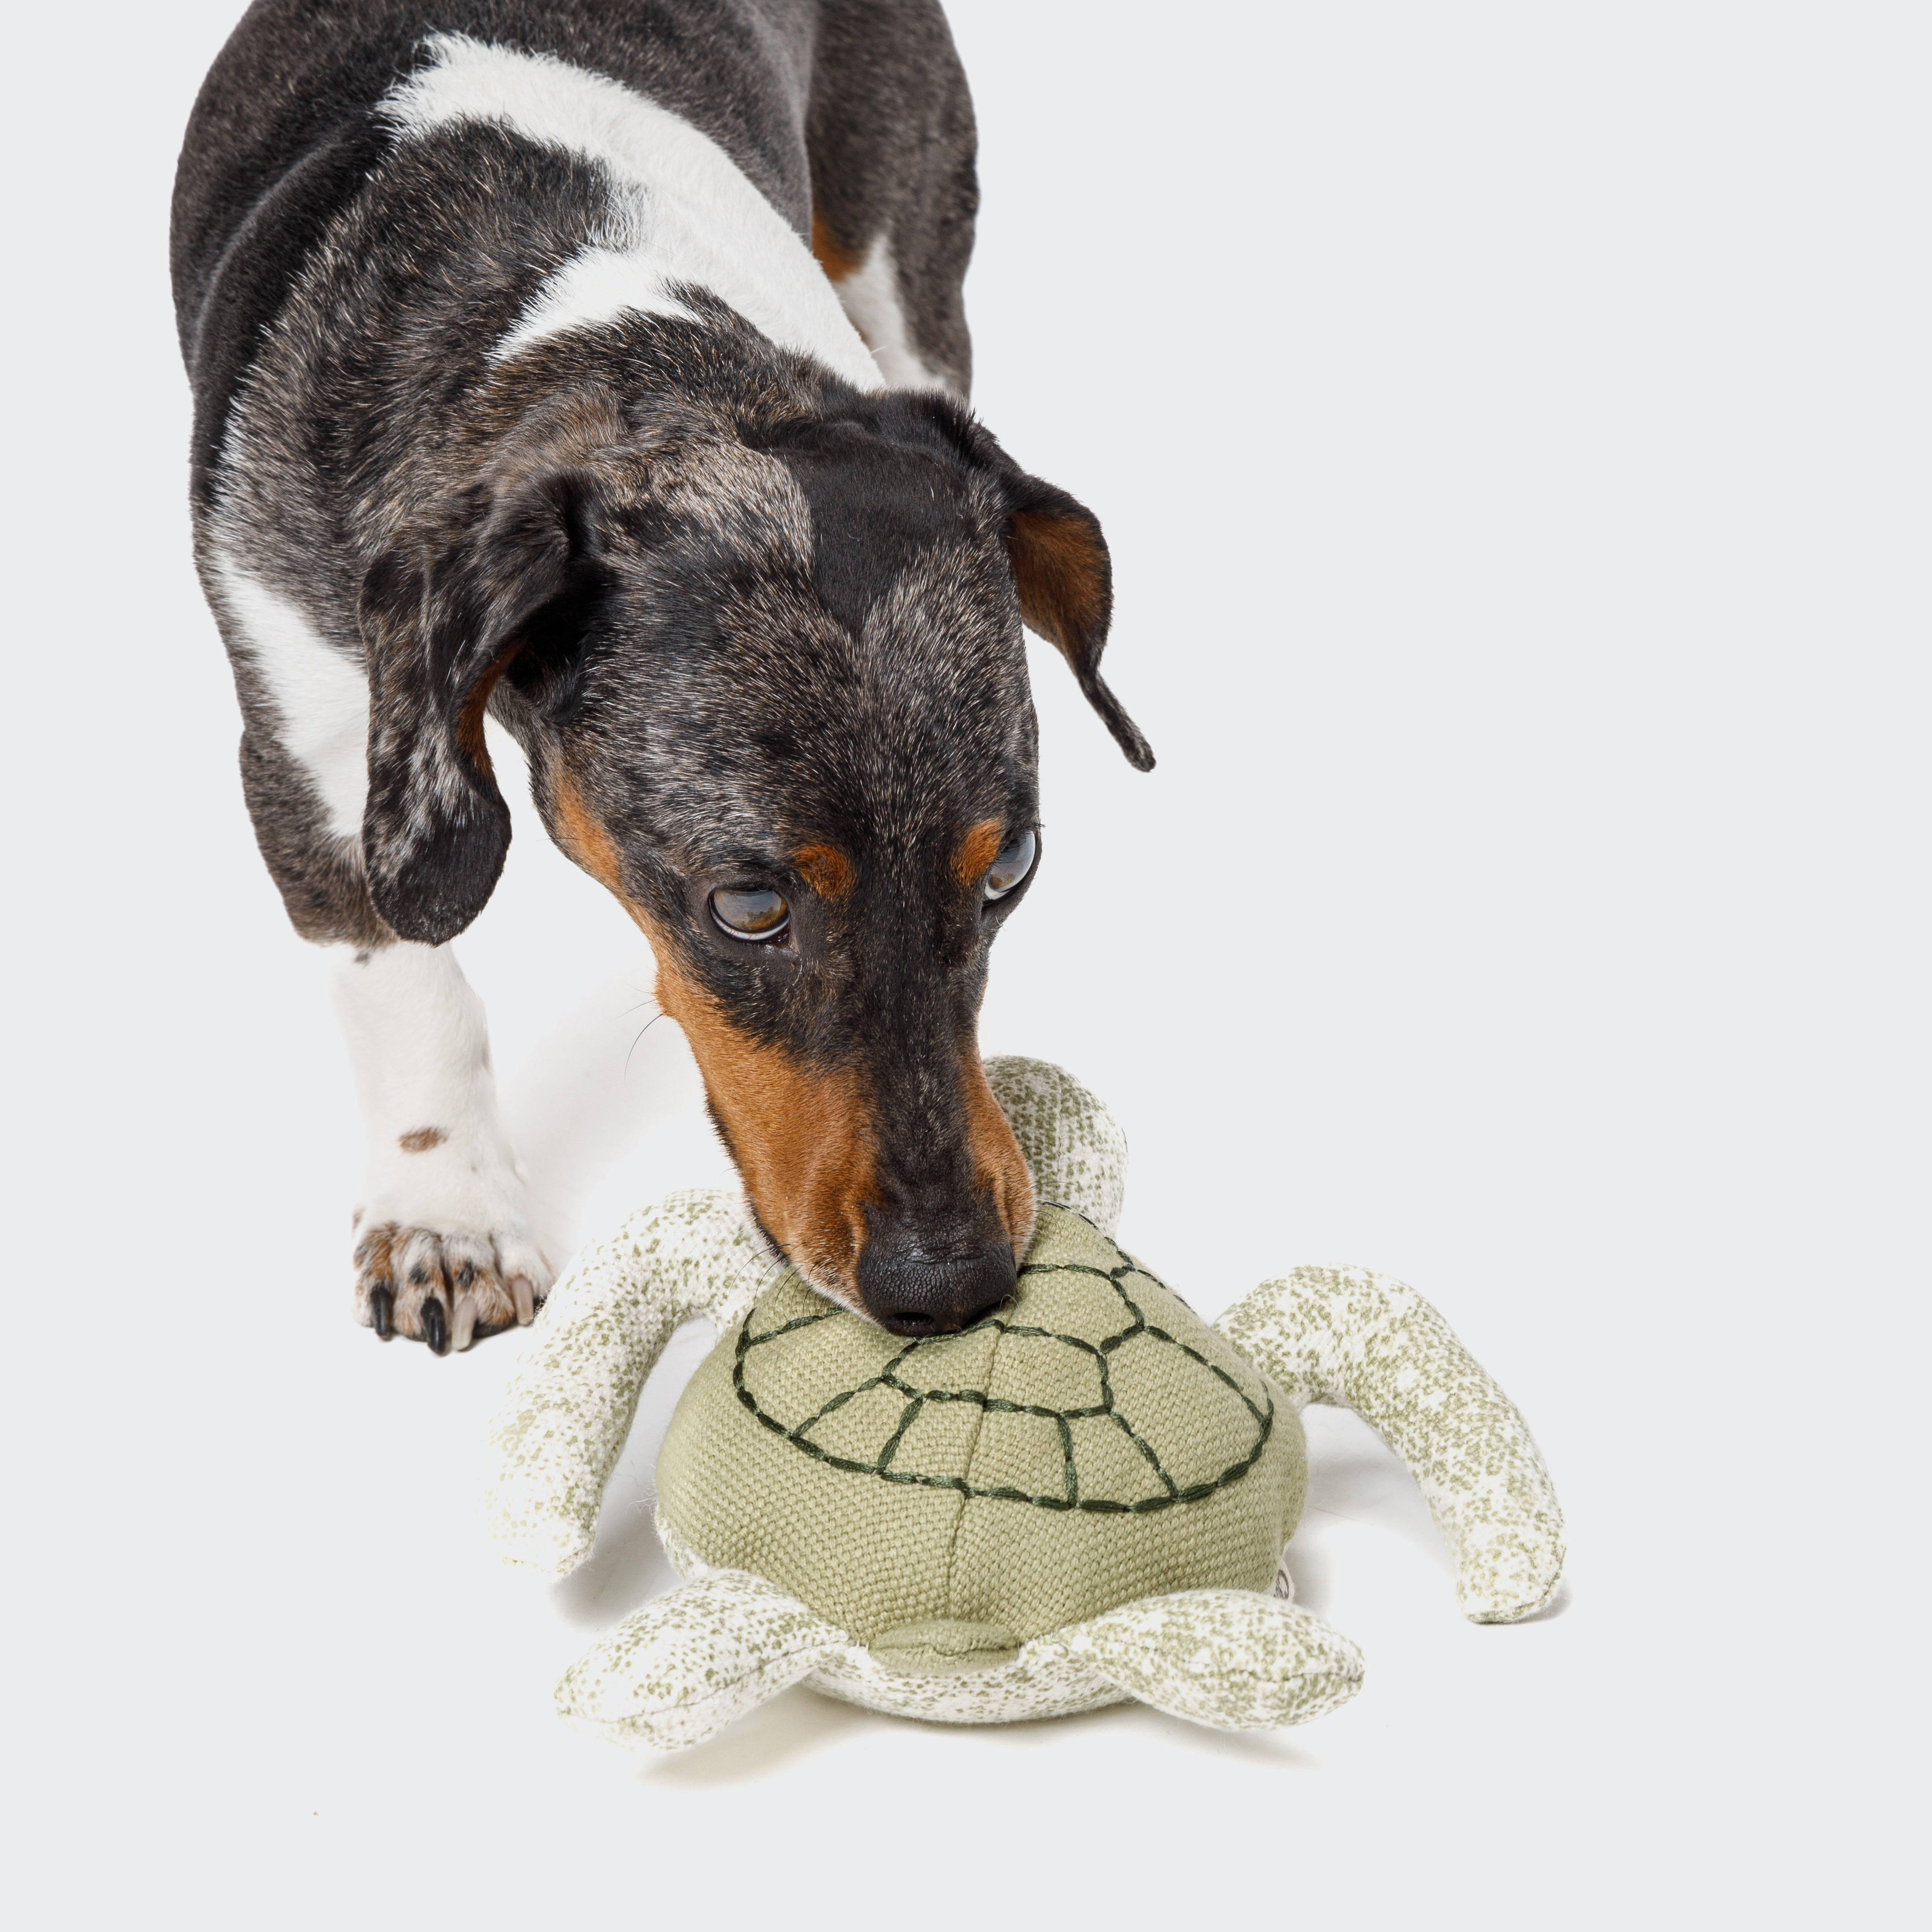 Cloud7 Dog Toy, Enna the Turtle